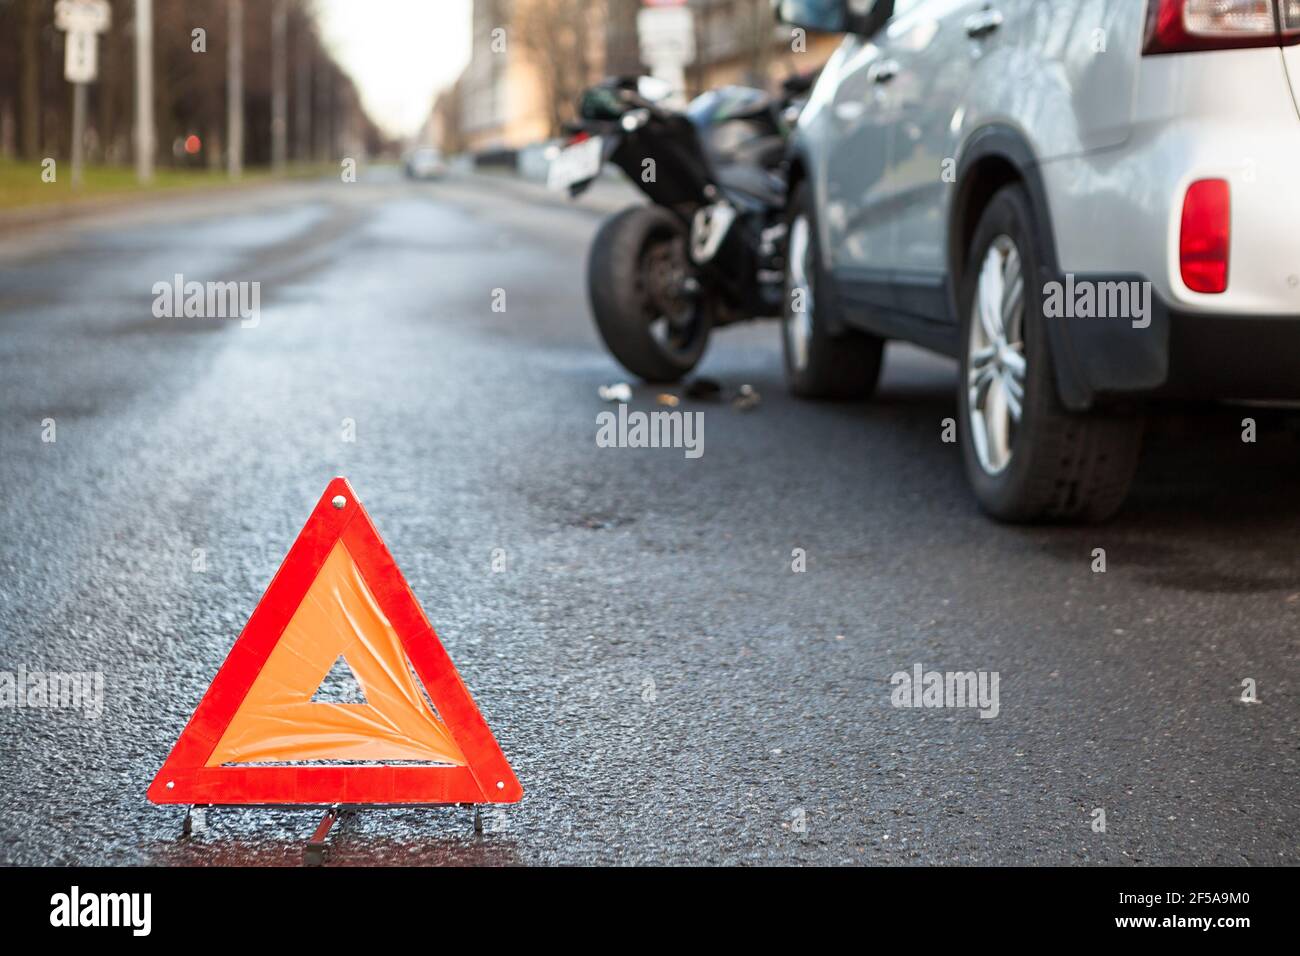 Warning triangle sign standing on a distance from road collision with a motorbike and car Stock Photo